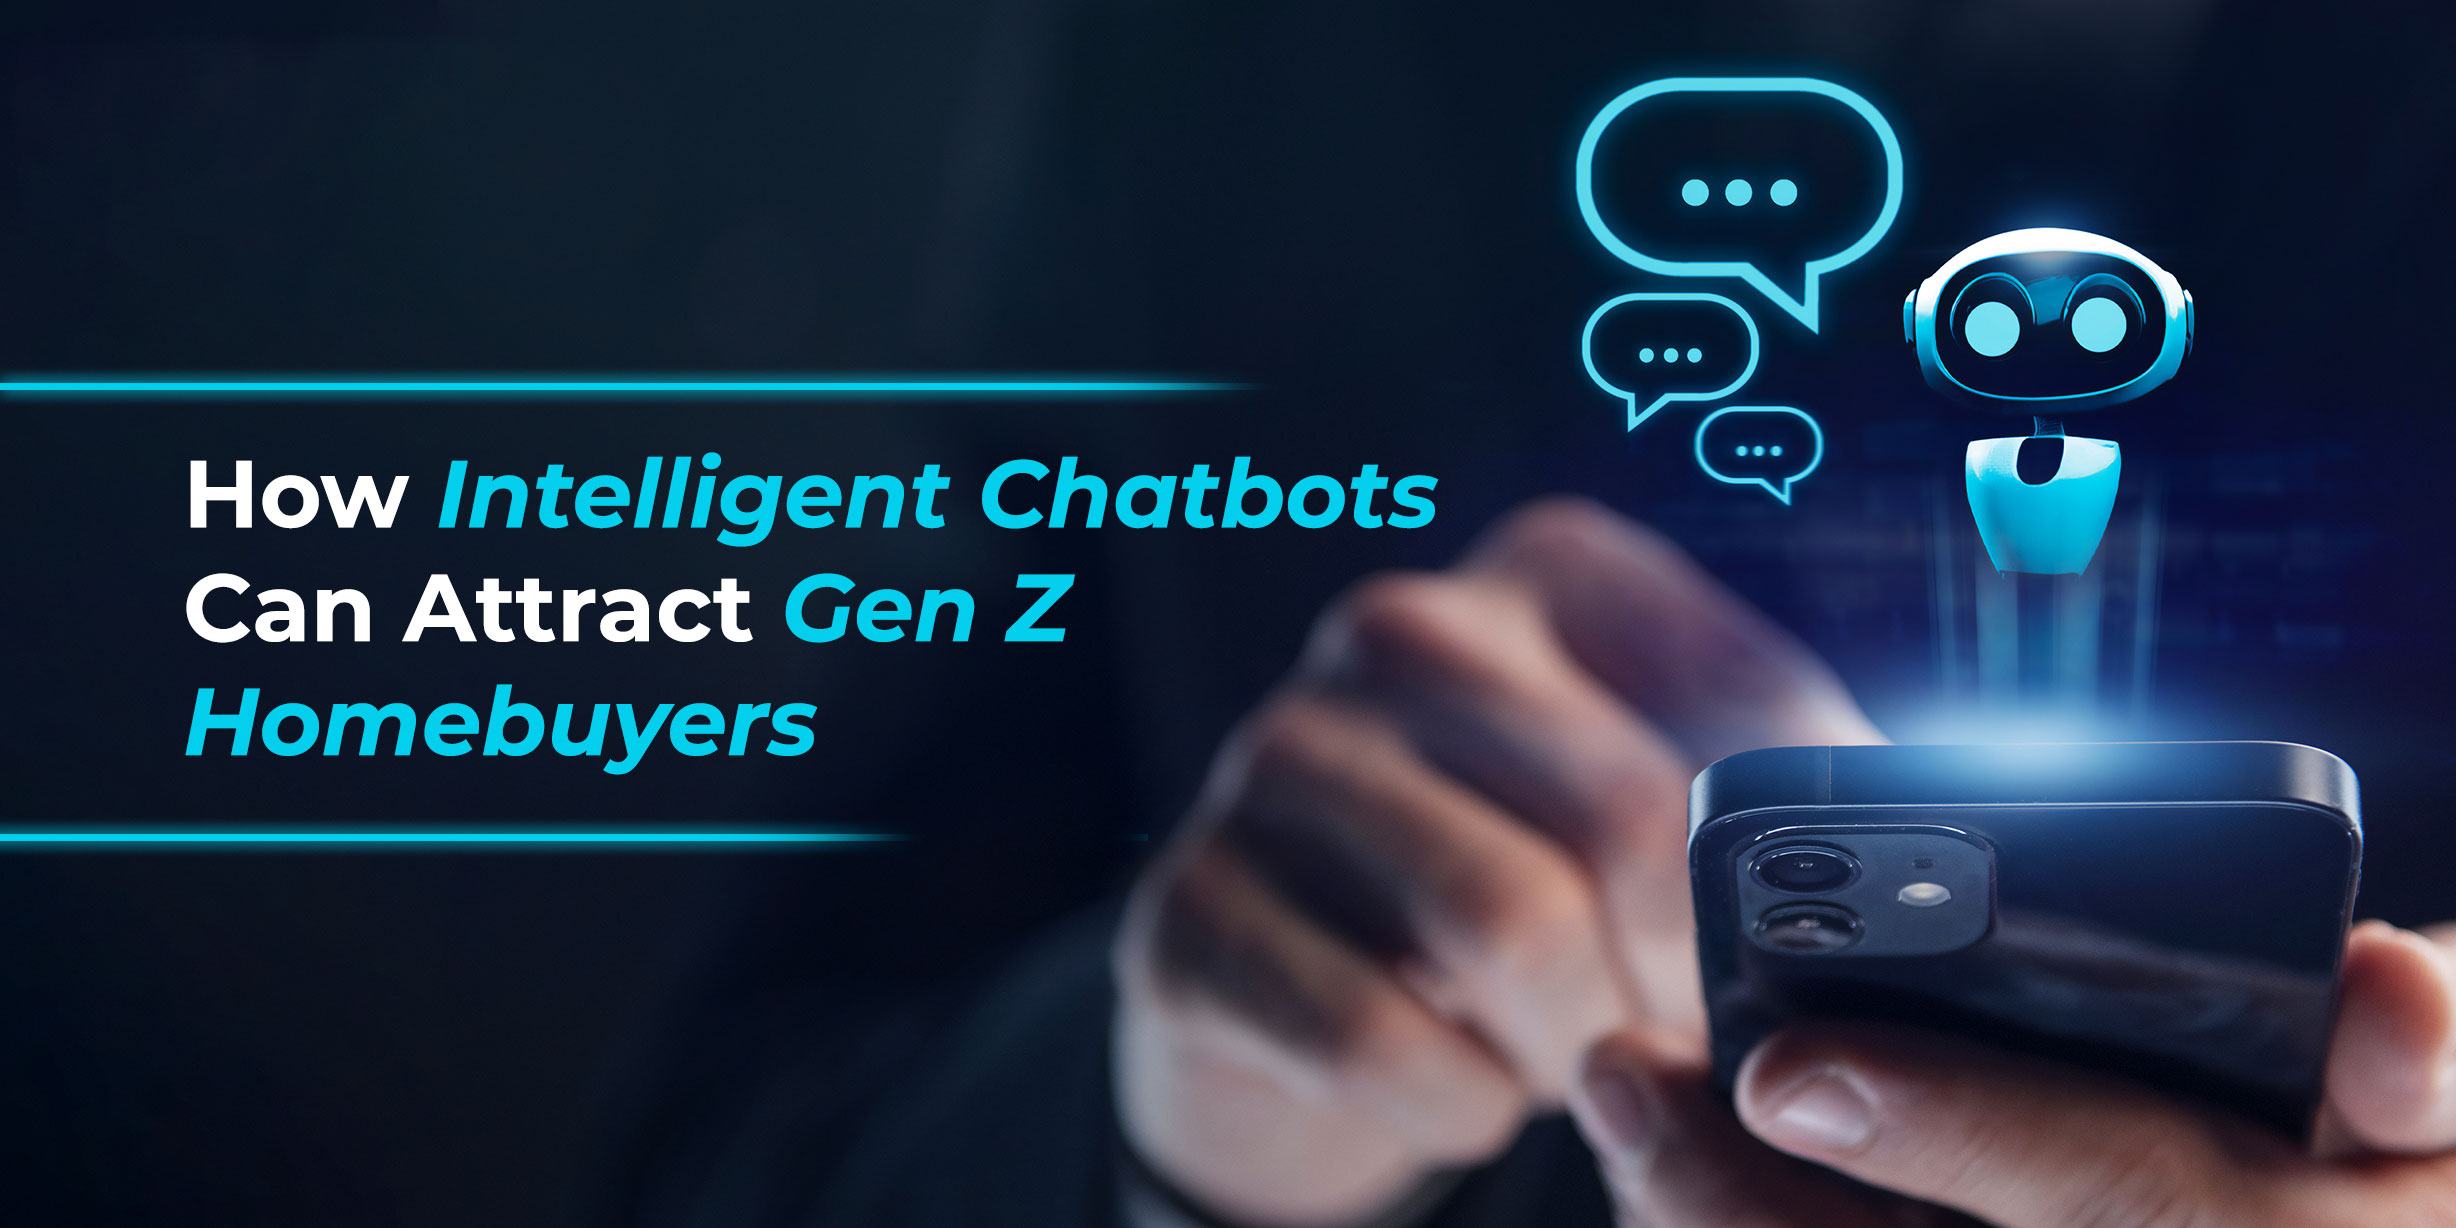 How Intelligent Chatbots Can Attract Gen Z Homebuyers